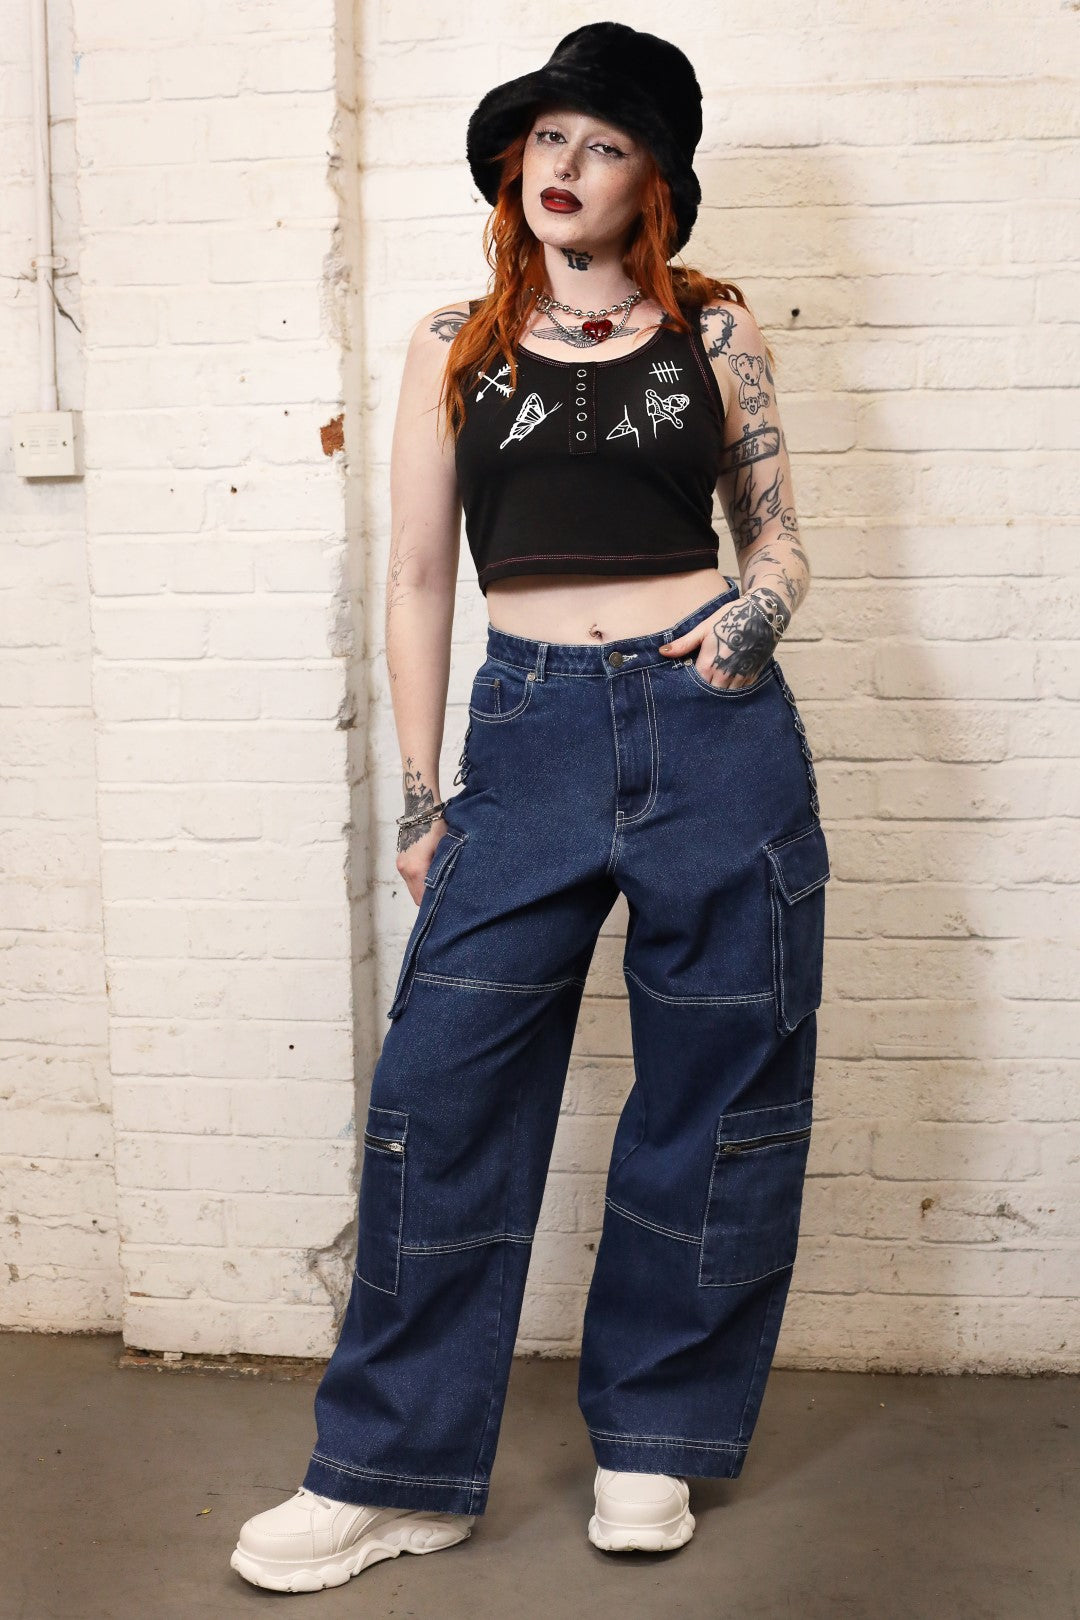 Denim, Dresses, Skirts, Trousers and Rockabilly Jeans at Hell Bunny